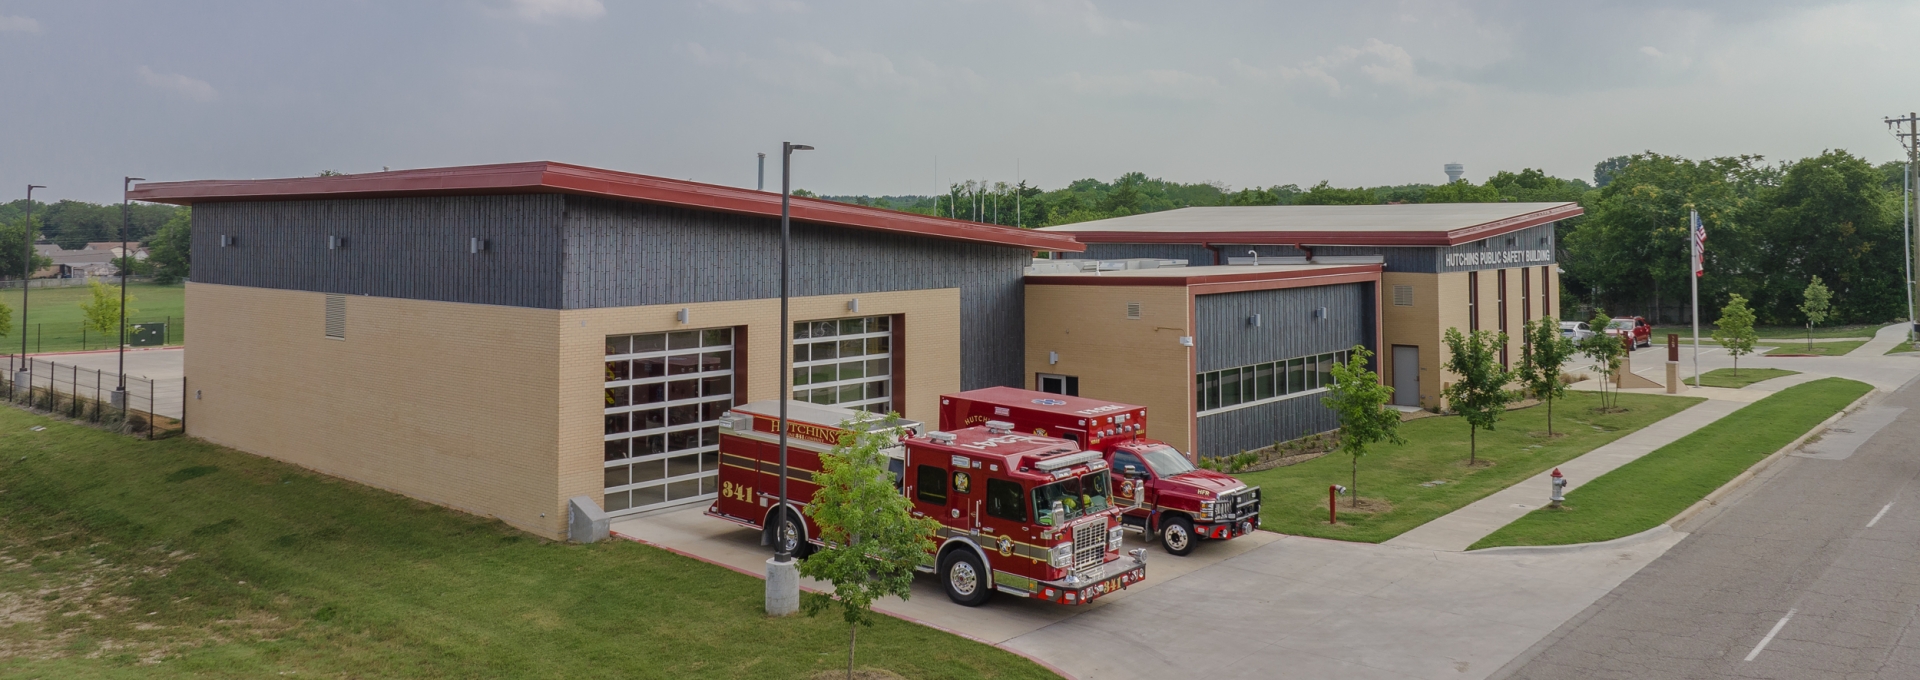 Aerial photo of the public safety building with a fire truck and ambulance parked in front of it. 